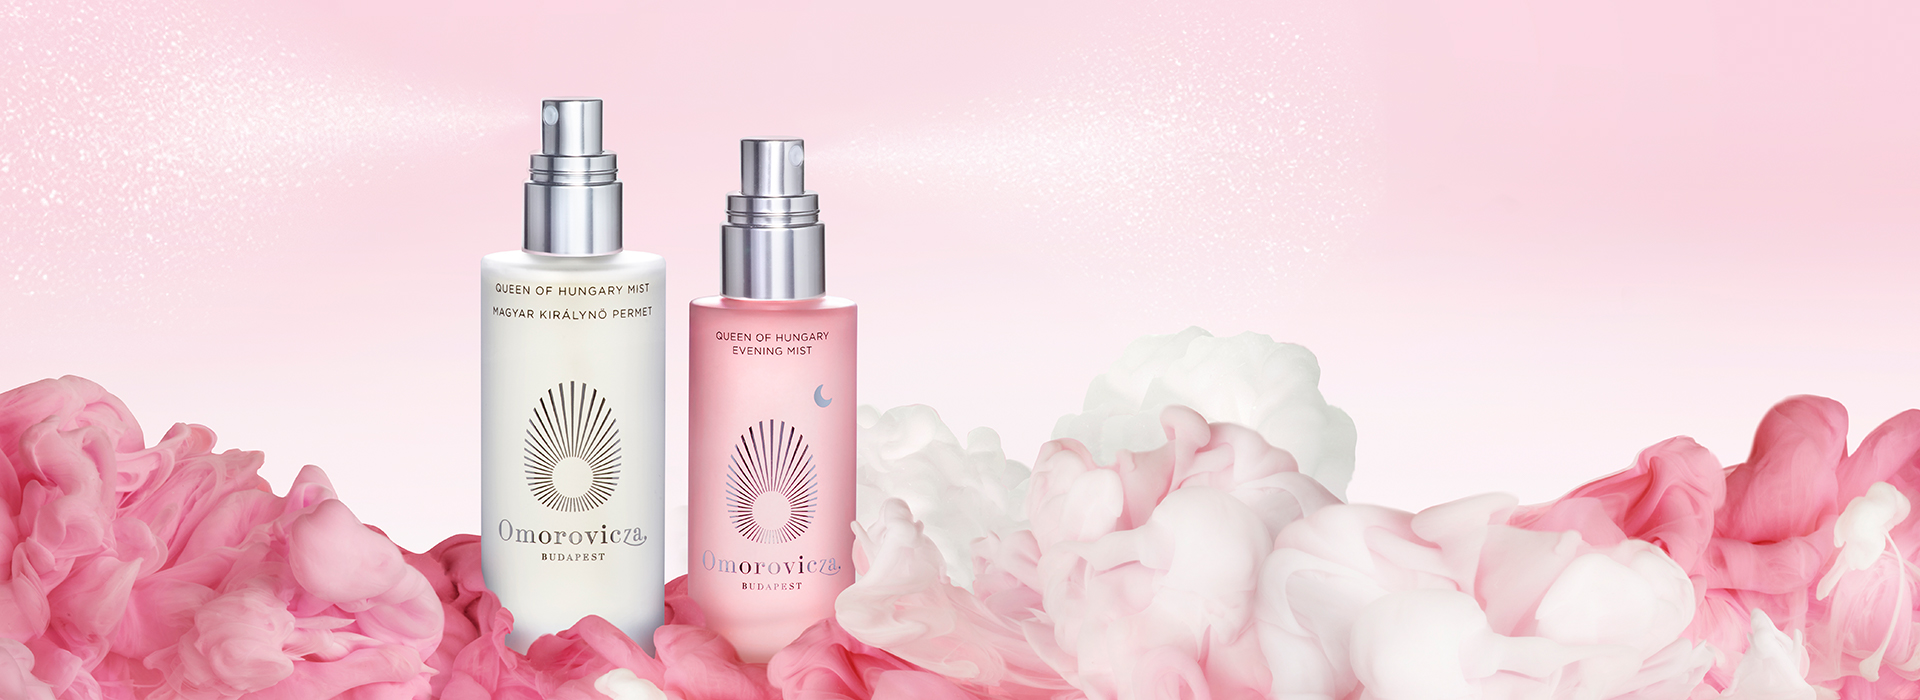 Introducing our Queen of Hungary Evening Mist. Why just sleep, when you could dream? Enhance the restorative quality of sleep for skin with the Queen of Hungary Evening Mist: a luxurious pre-pillow facial mist combining repair-enhancing actives with calming lavender extract, for an indulgent veil of beauty sleep.